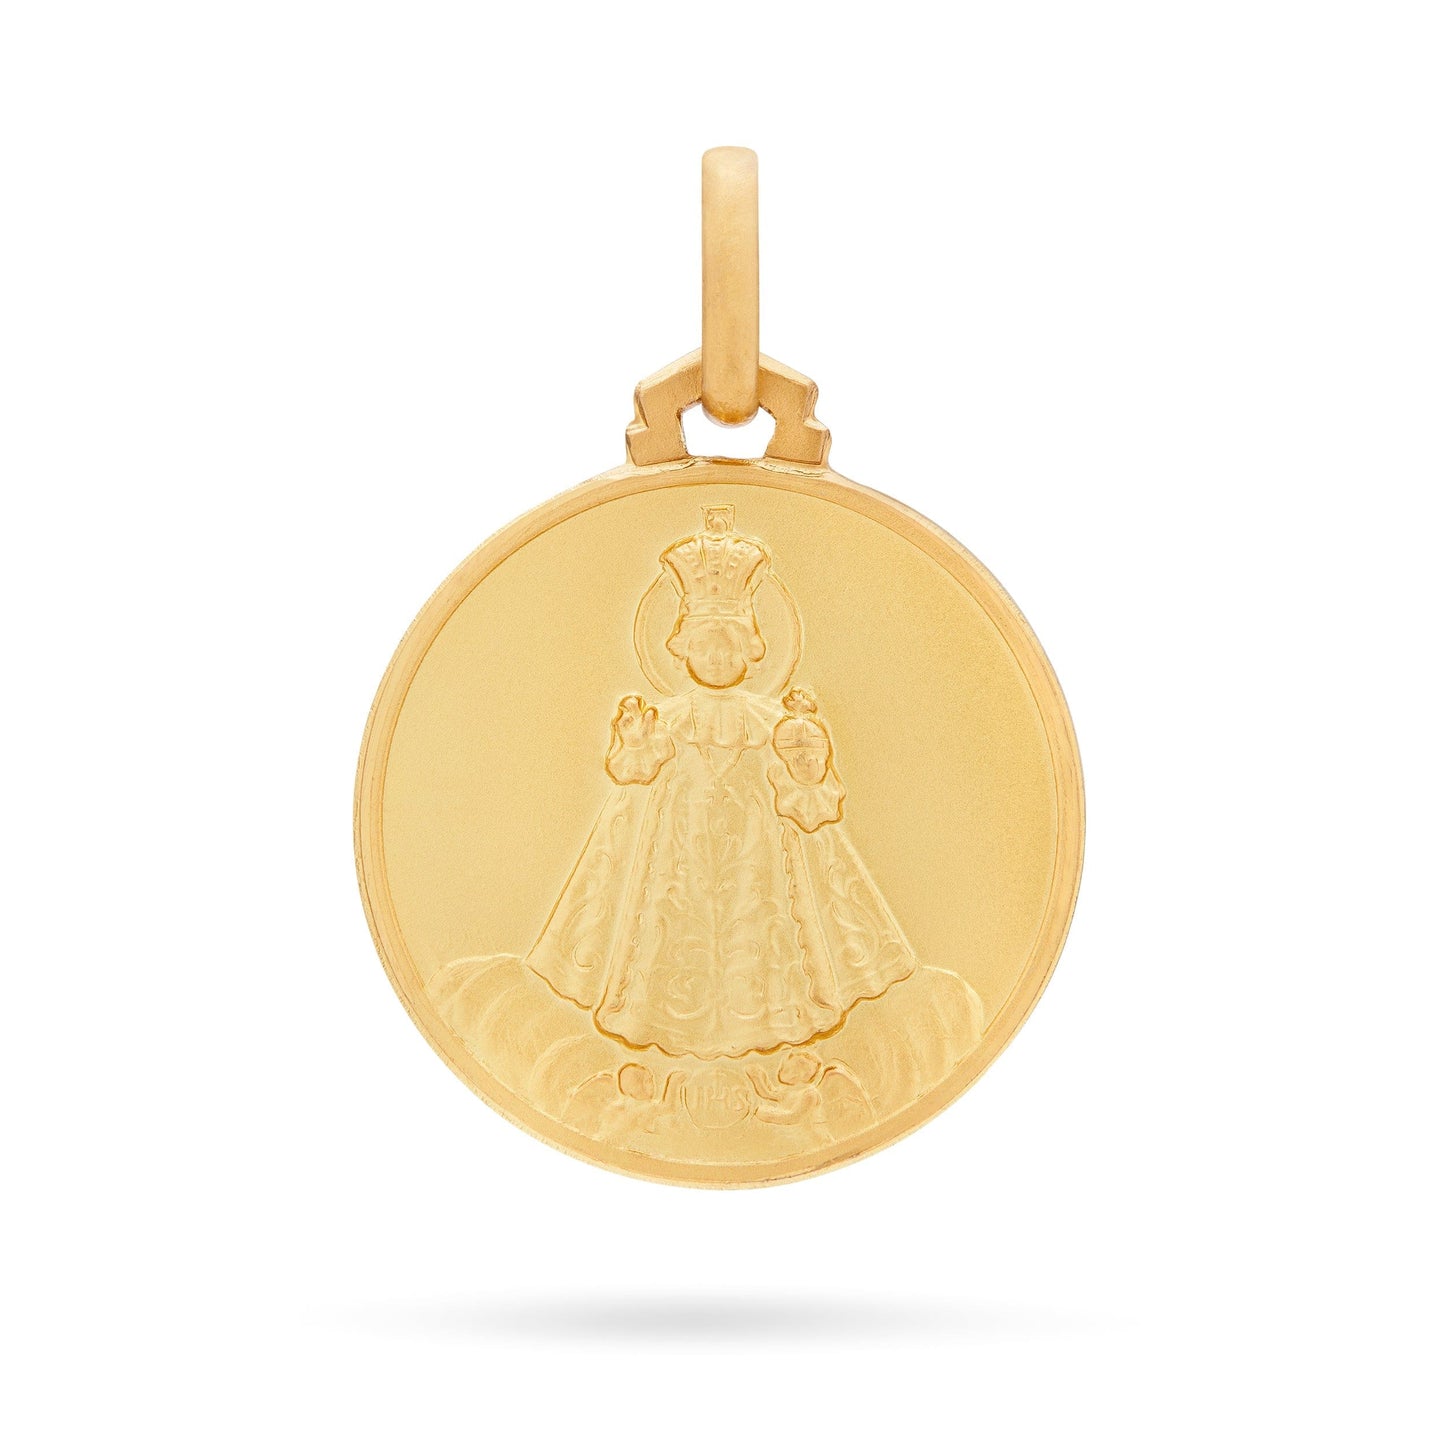 MONDO CATTOLICO Jewelry 18 mm (0.70 in) Gold medal of the Child of Prague